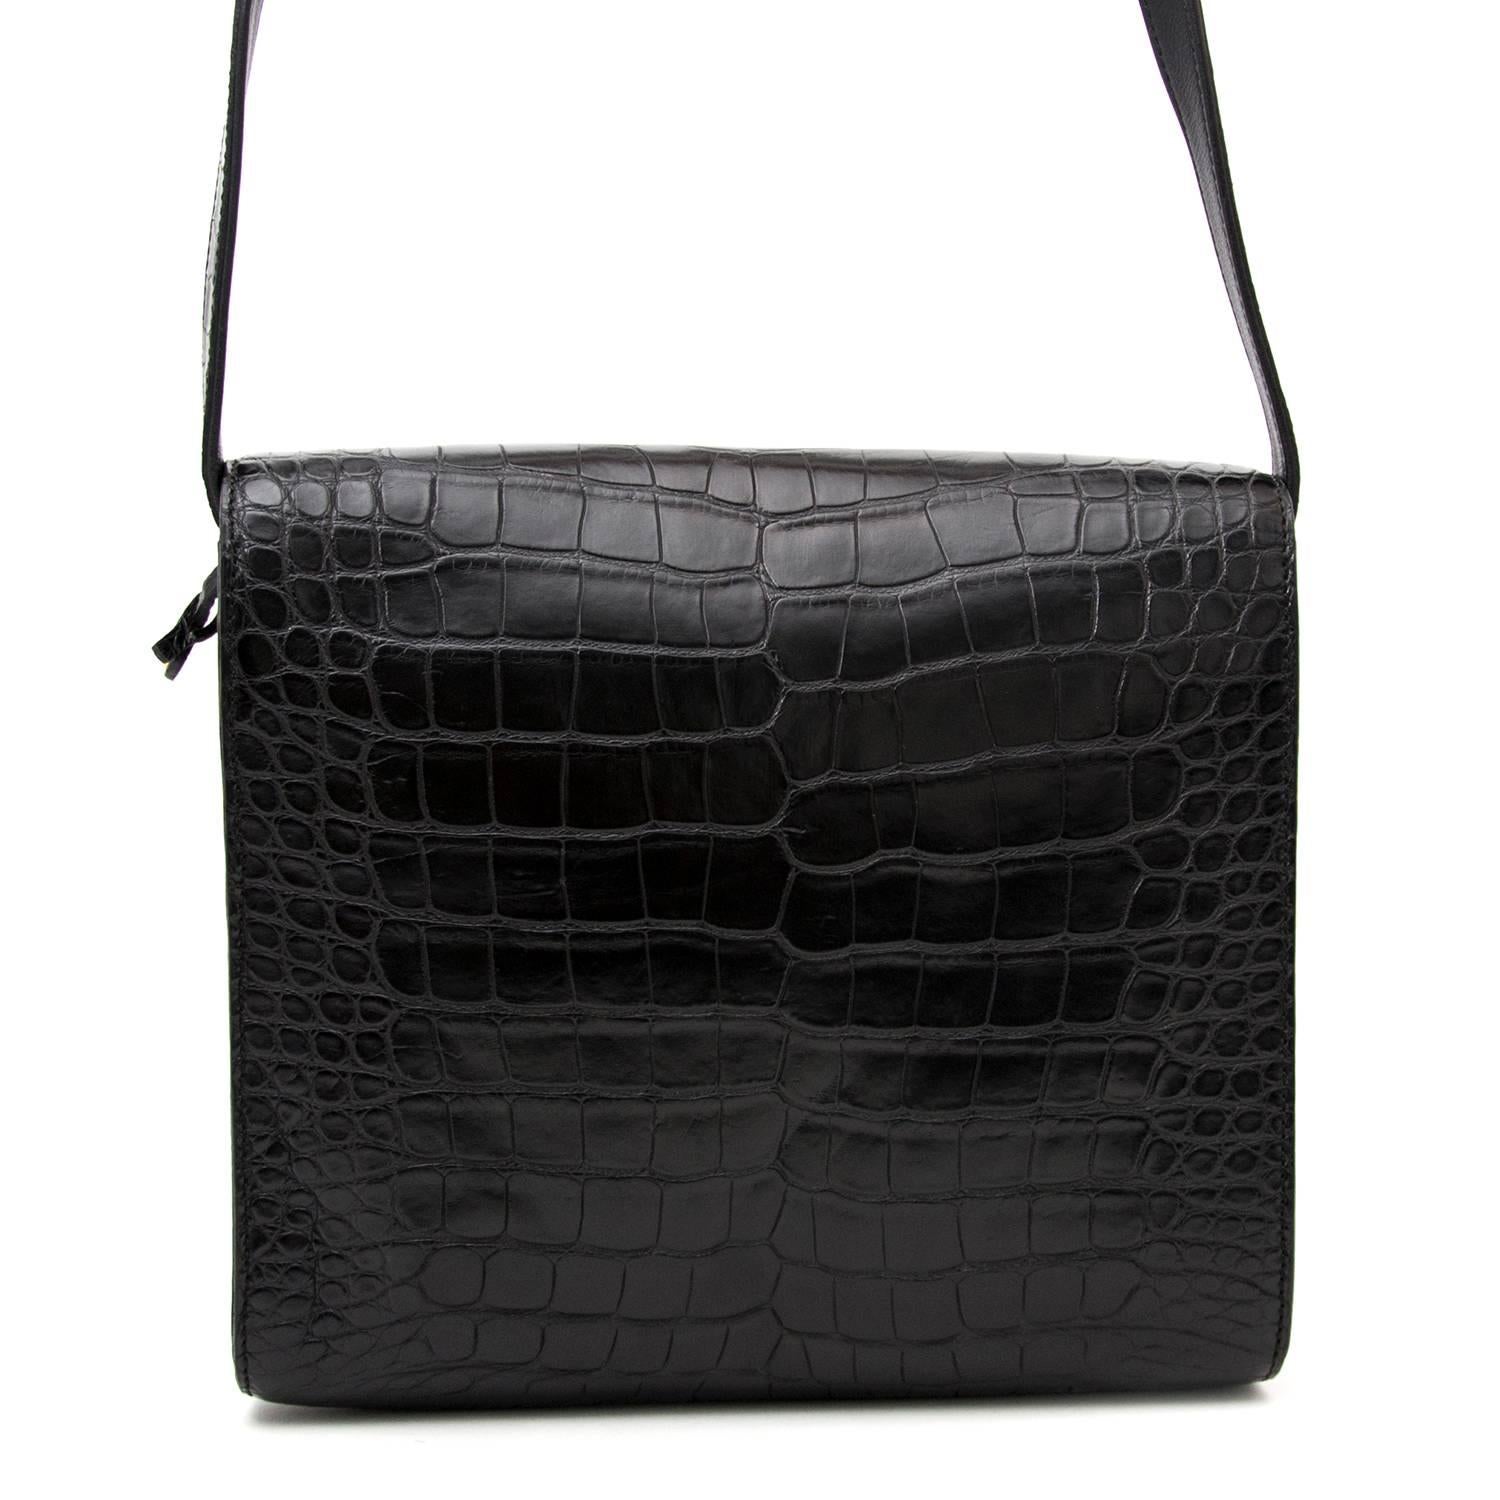 Delvaux Black Croco Crossbody Bag 
Timeless black Delvaux piece in croco leather. 
Perfect to keep all your essentials in an elegant way.
Practical adjustable strap. 
Gold toned lock closure with engraved Delvaux emblem. 
Comes in with original